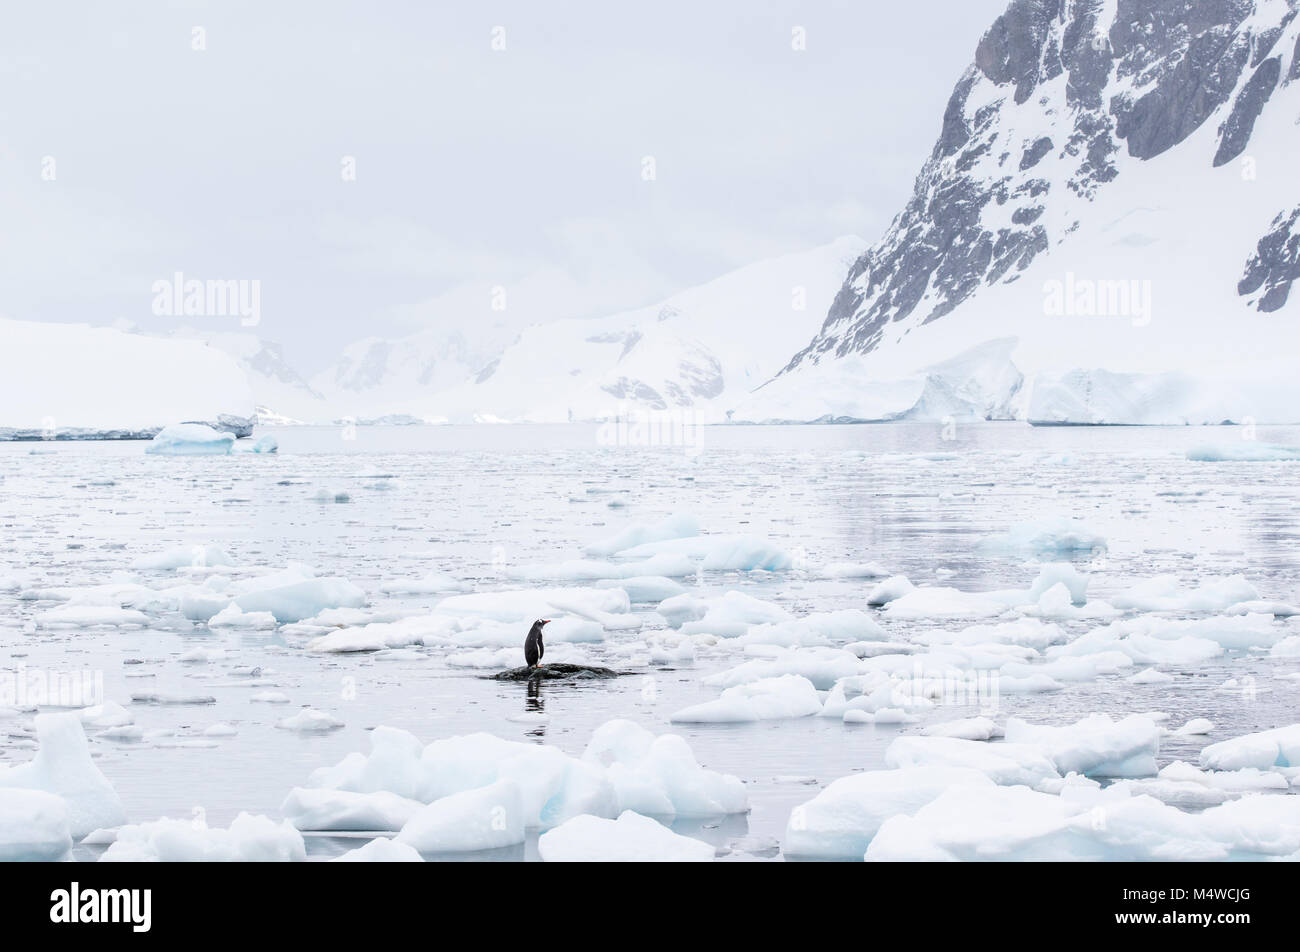 A lone gentoo penguin standing on a partly submerged rock surrounded by sea ice at Danco Island, Antarctica. Stock Photo